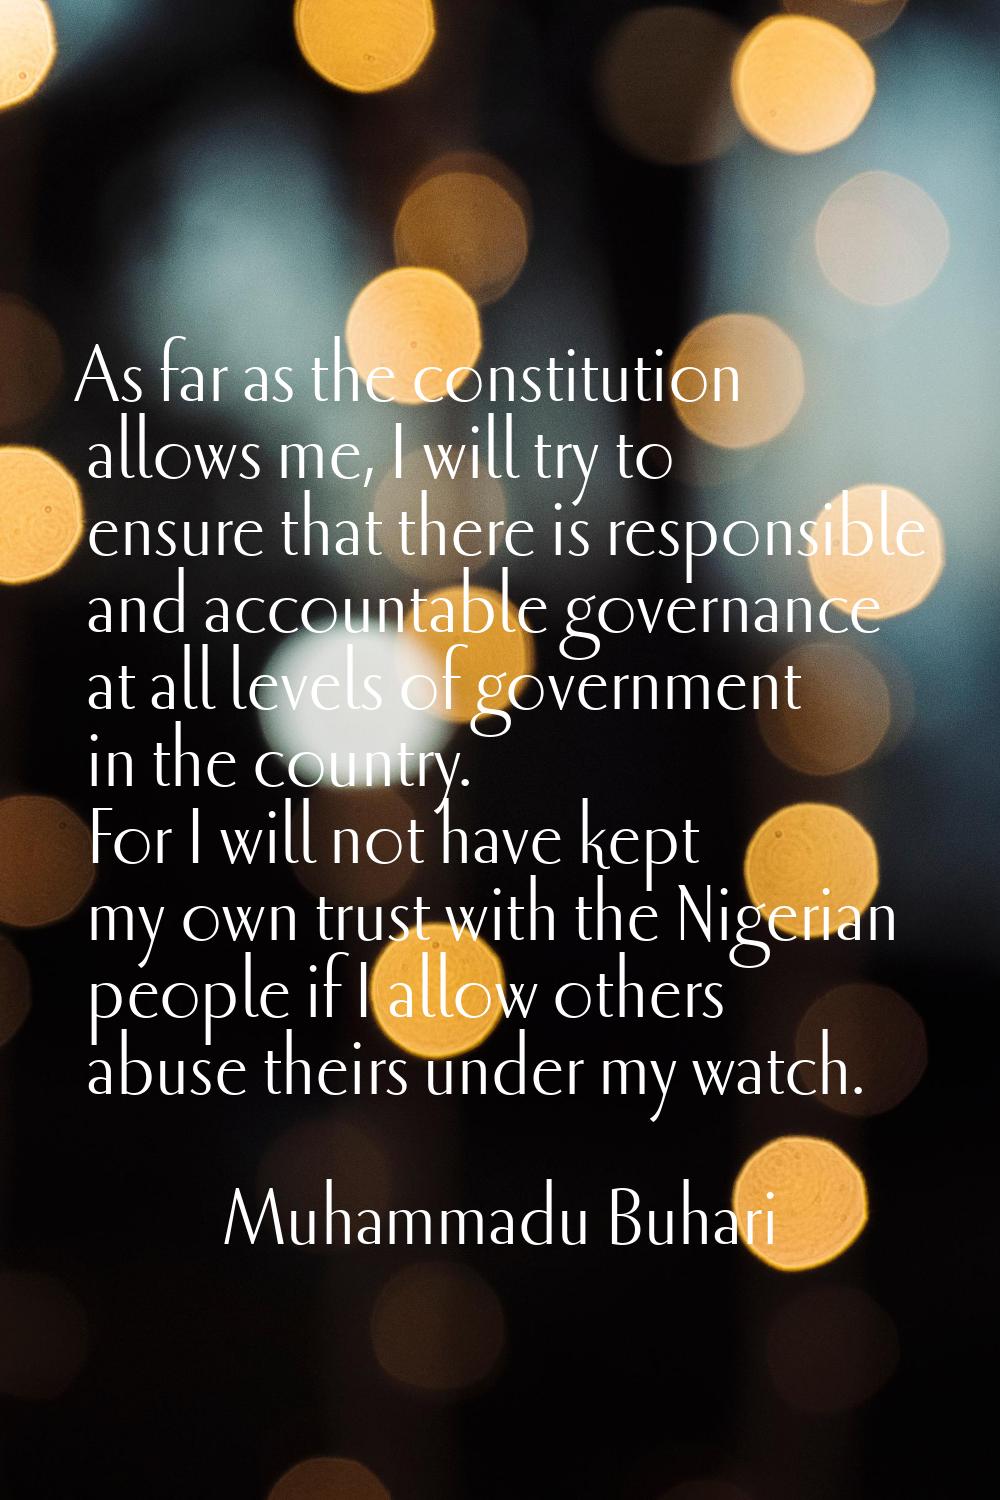 As far as the constitution allows me, I will try to ensure that there is responsible and accountabl